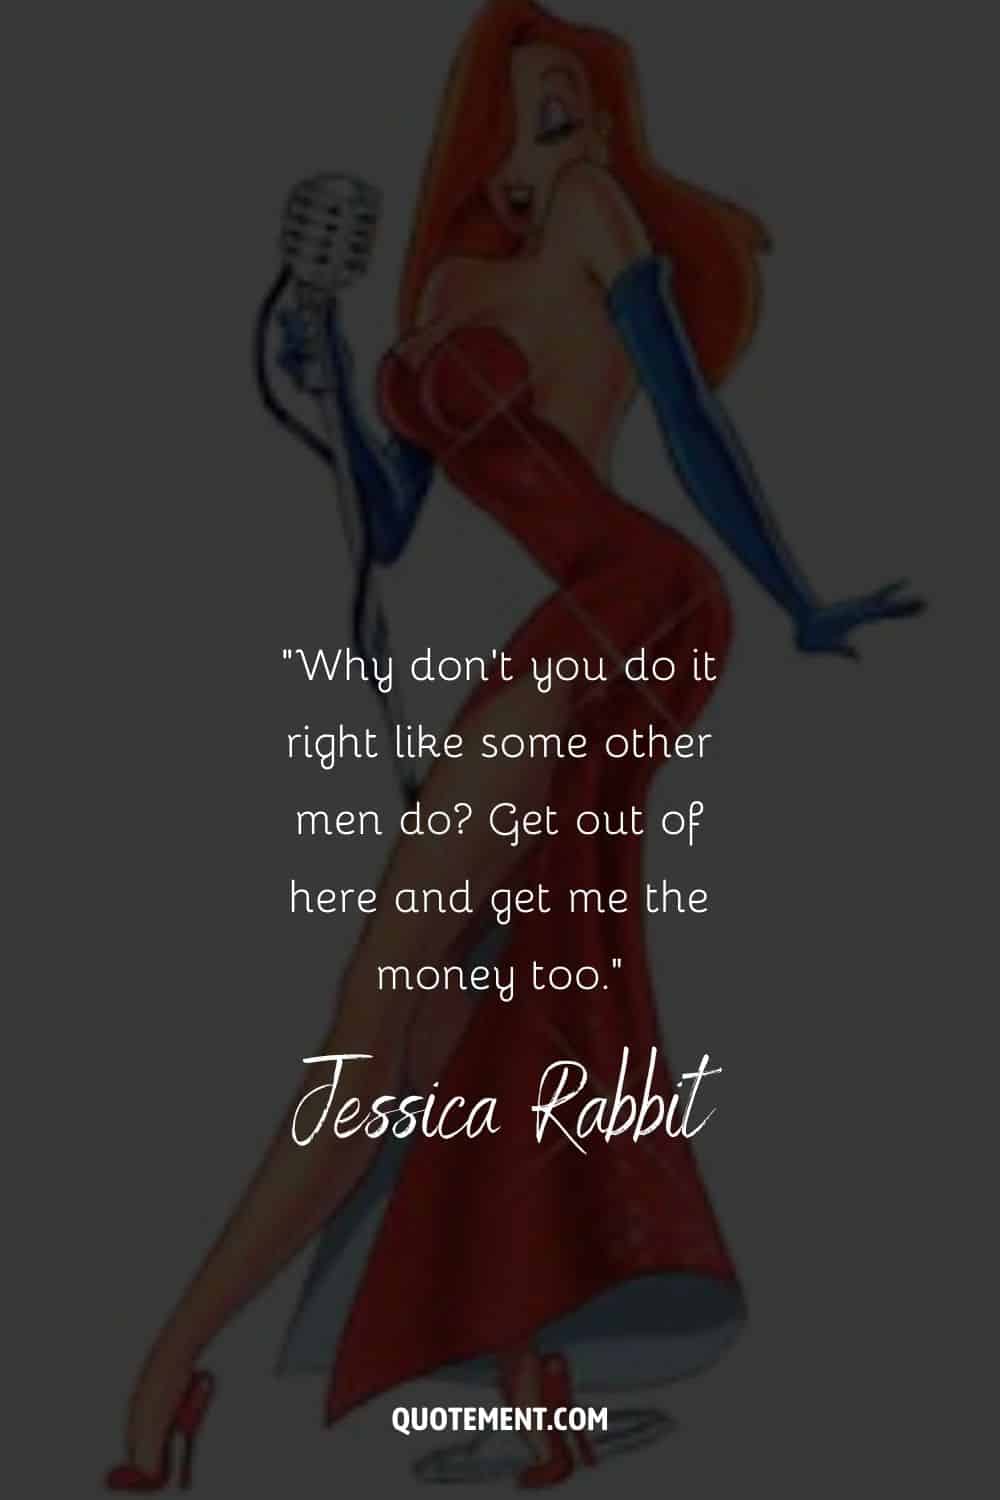 Jessica Rabbit holding a microphone representing her quote
